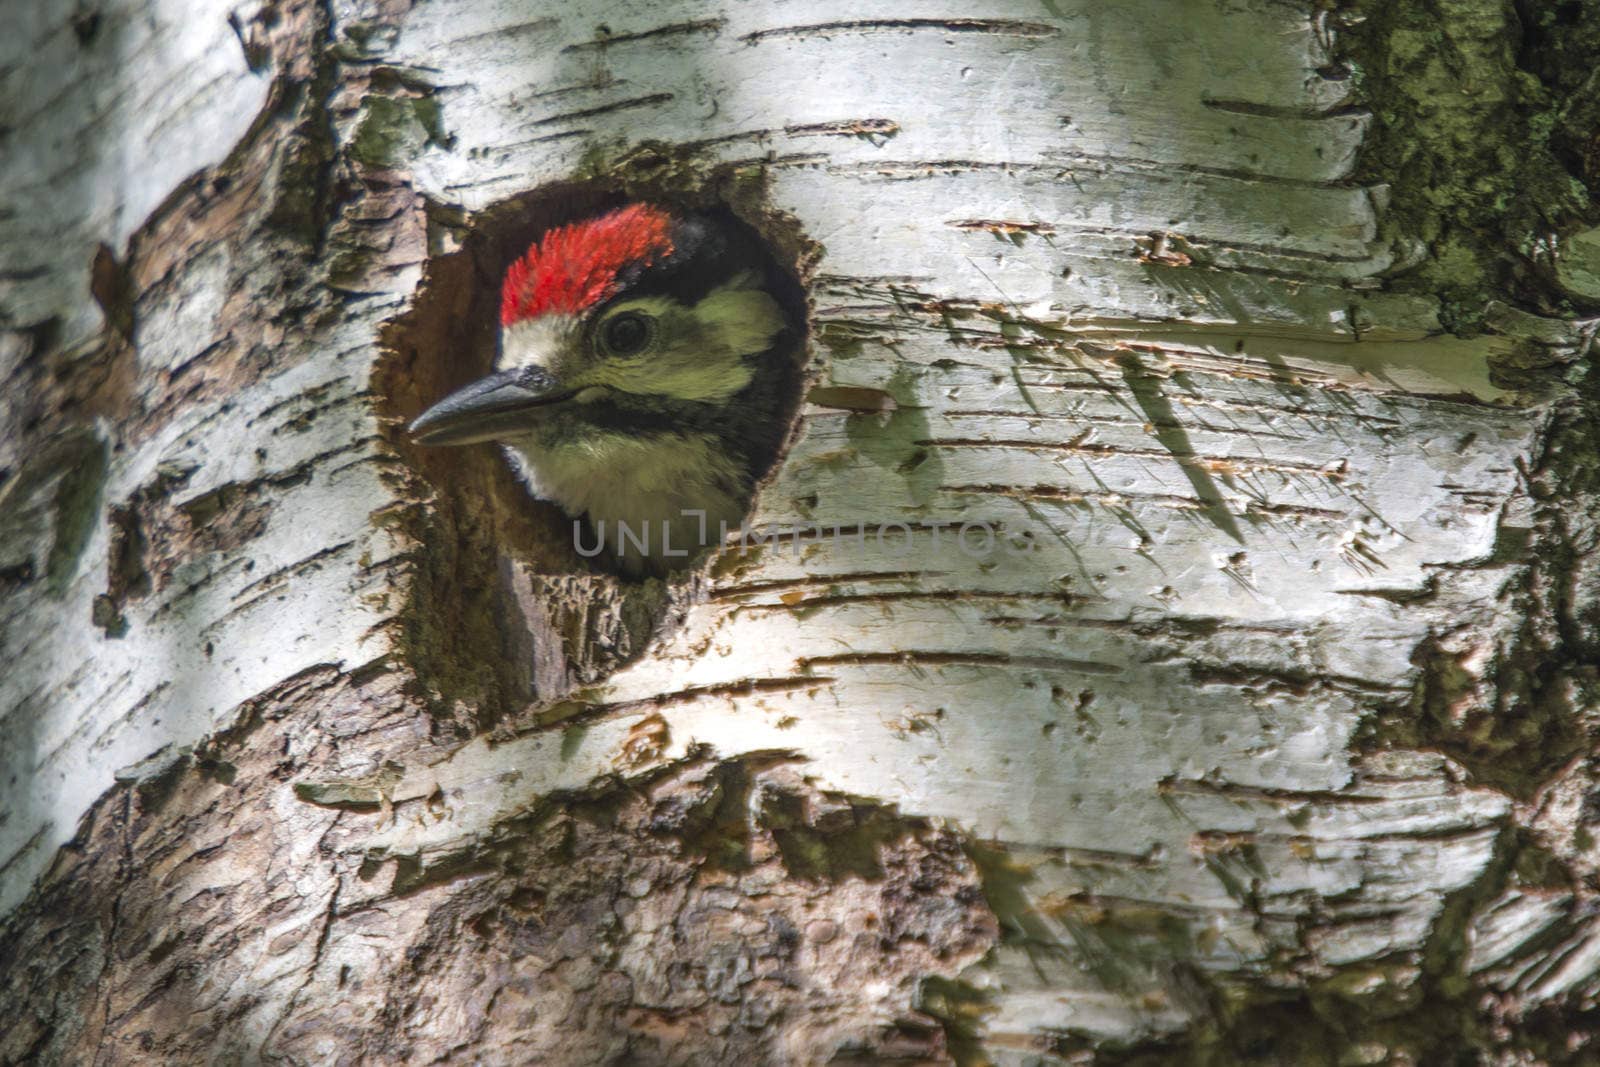 Photo was shot in a forest on Red's rock mountain in Halden, Norway and showing a great spotted woodpecker, Dendrocopos major chick that are waiting to fly out of the nest.